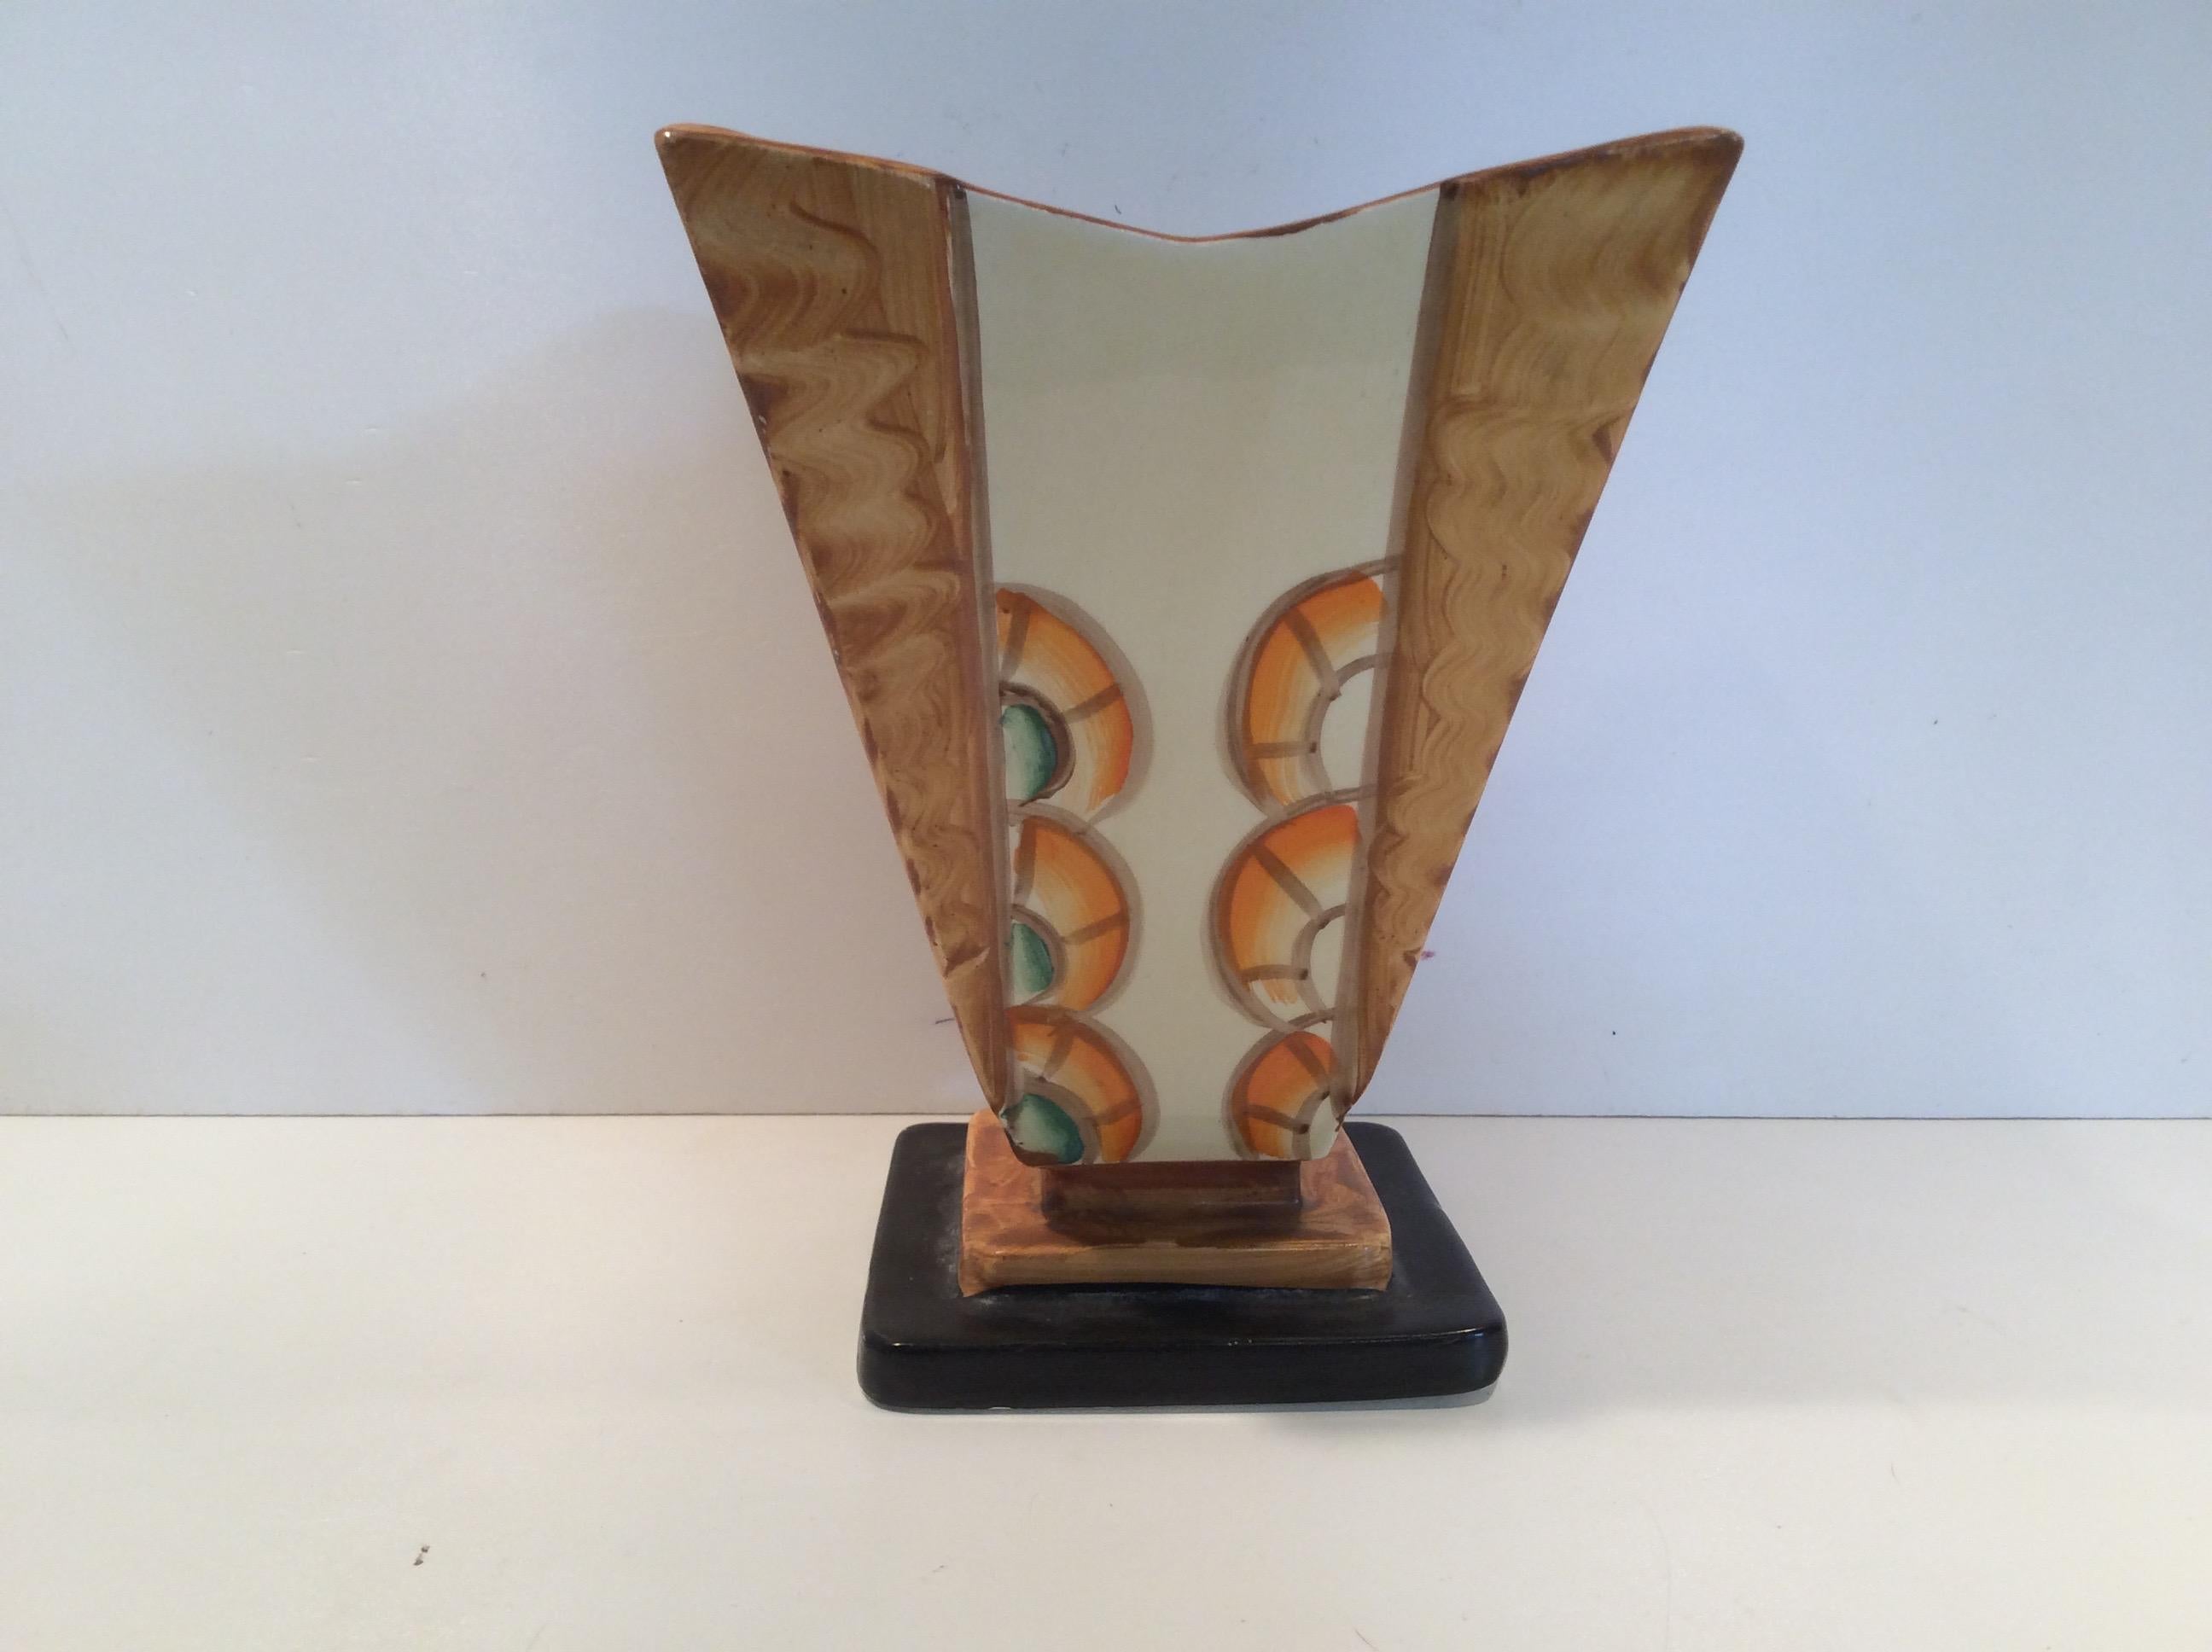 British Hand-Painted Art Deco Vase by Myott and Son For Sale